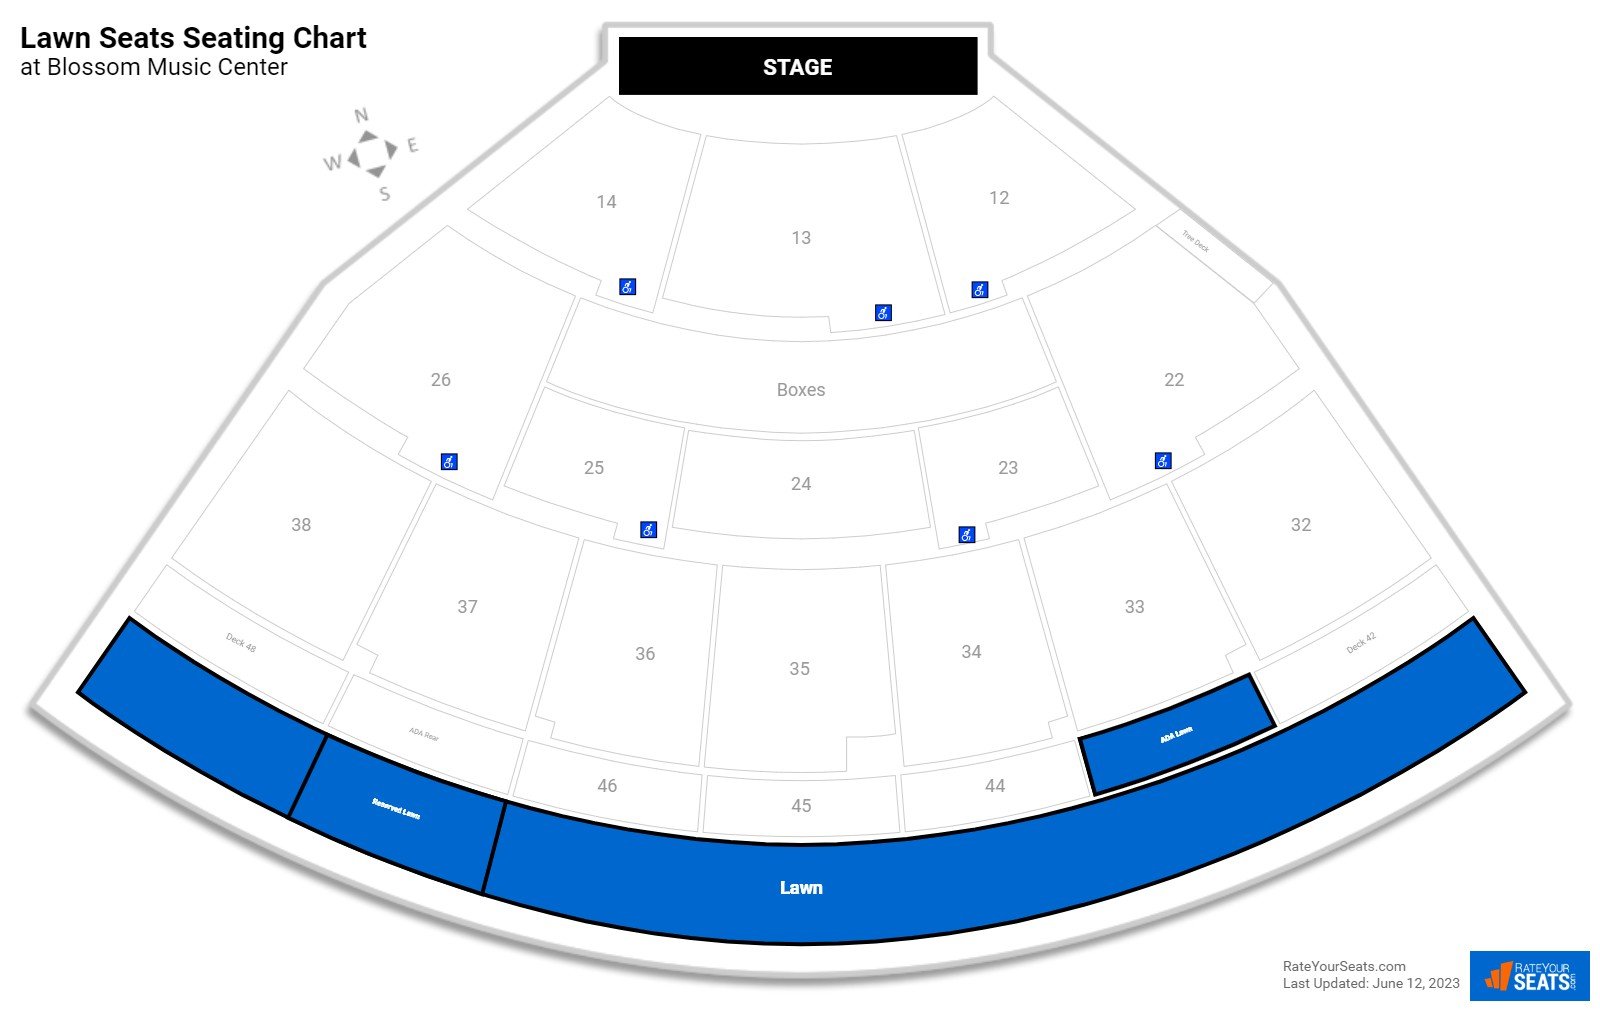 Concert Lawn Seats Seating Chart at Blossom Music Center